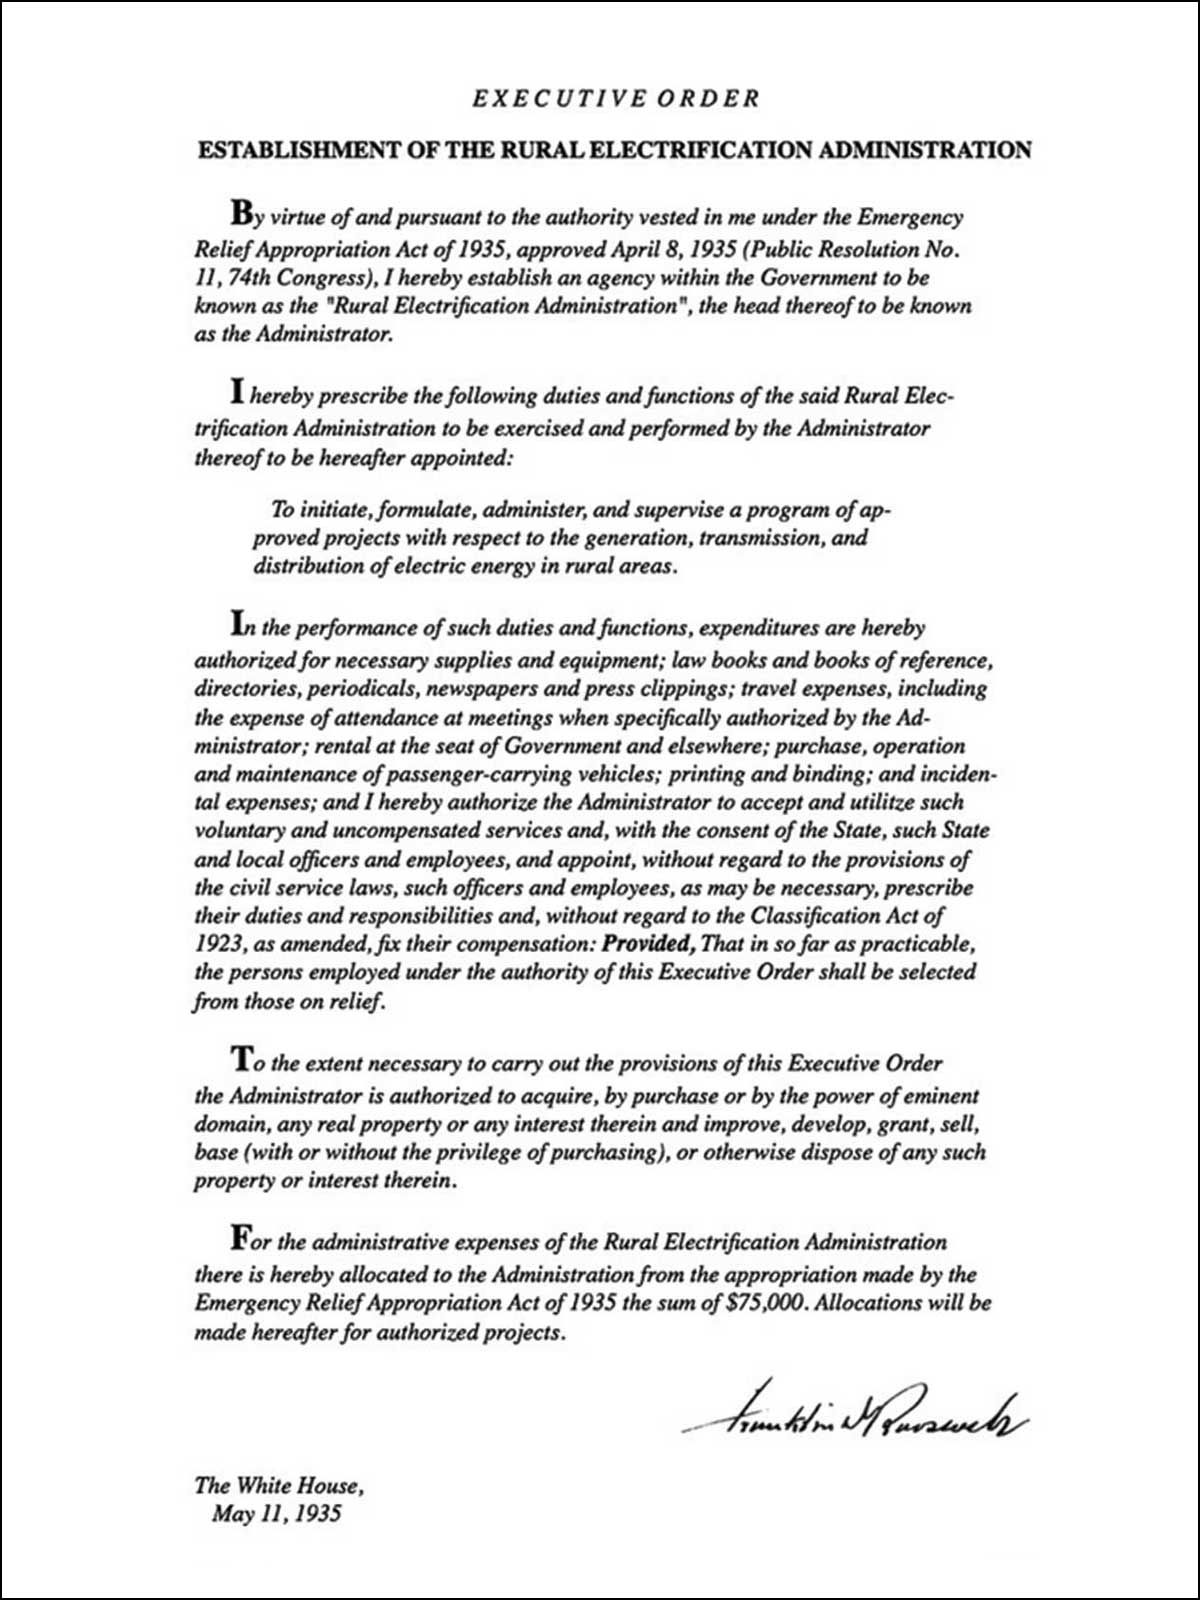 A copy of the executive order establishing the Rural Electrification Administration